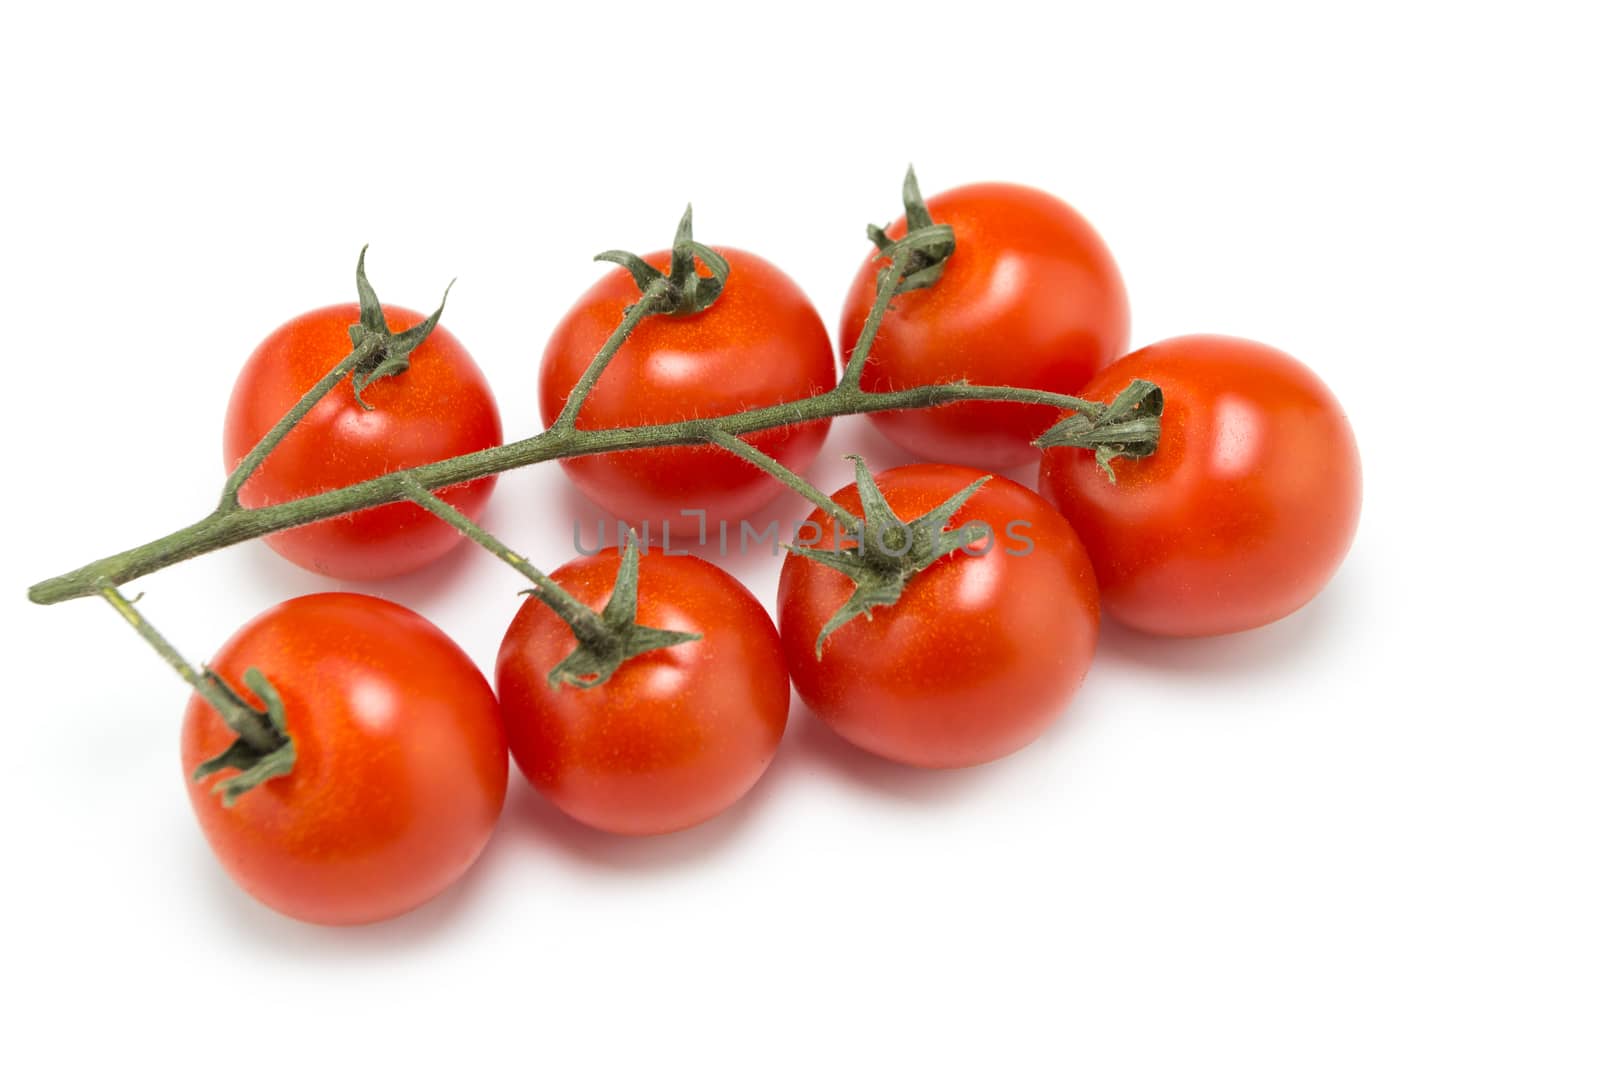 Bunch of fresh tomatoes  by wyoosumran